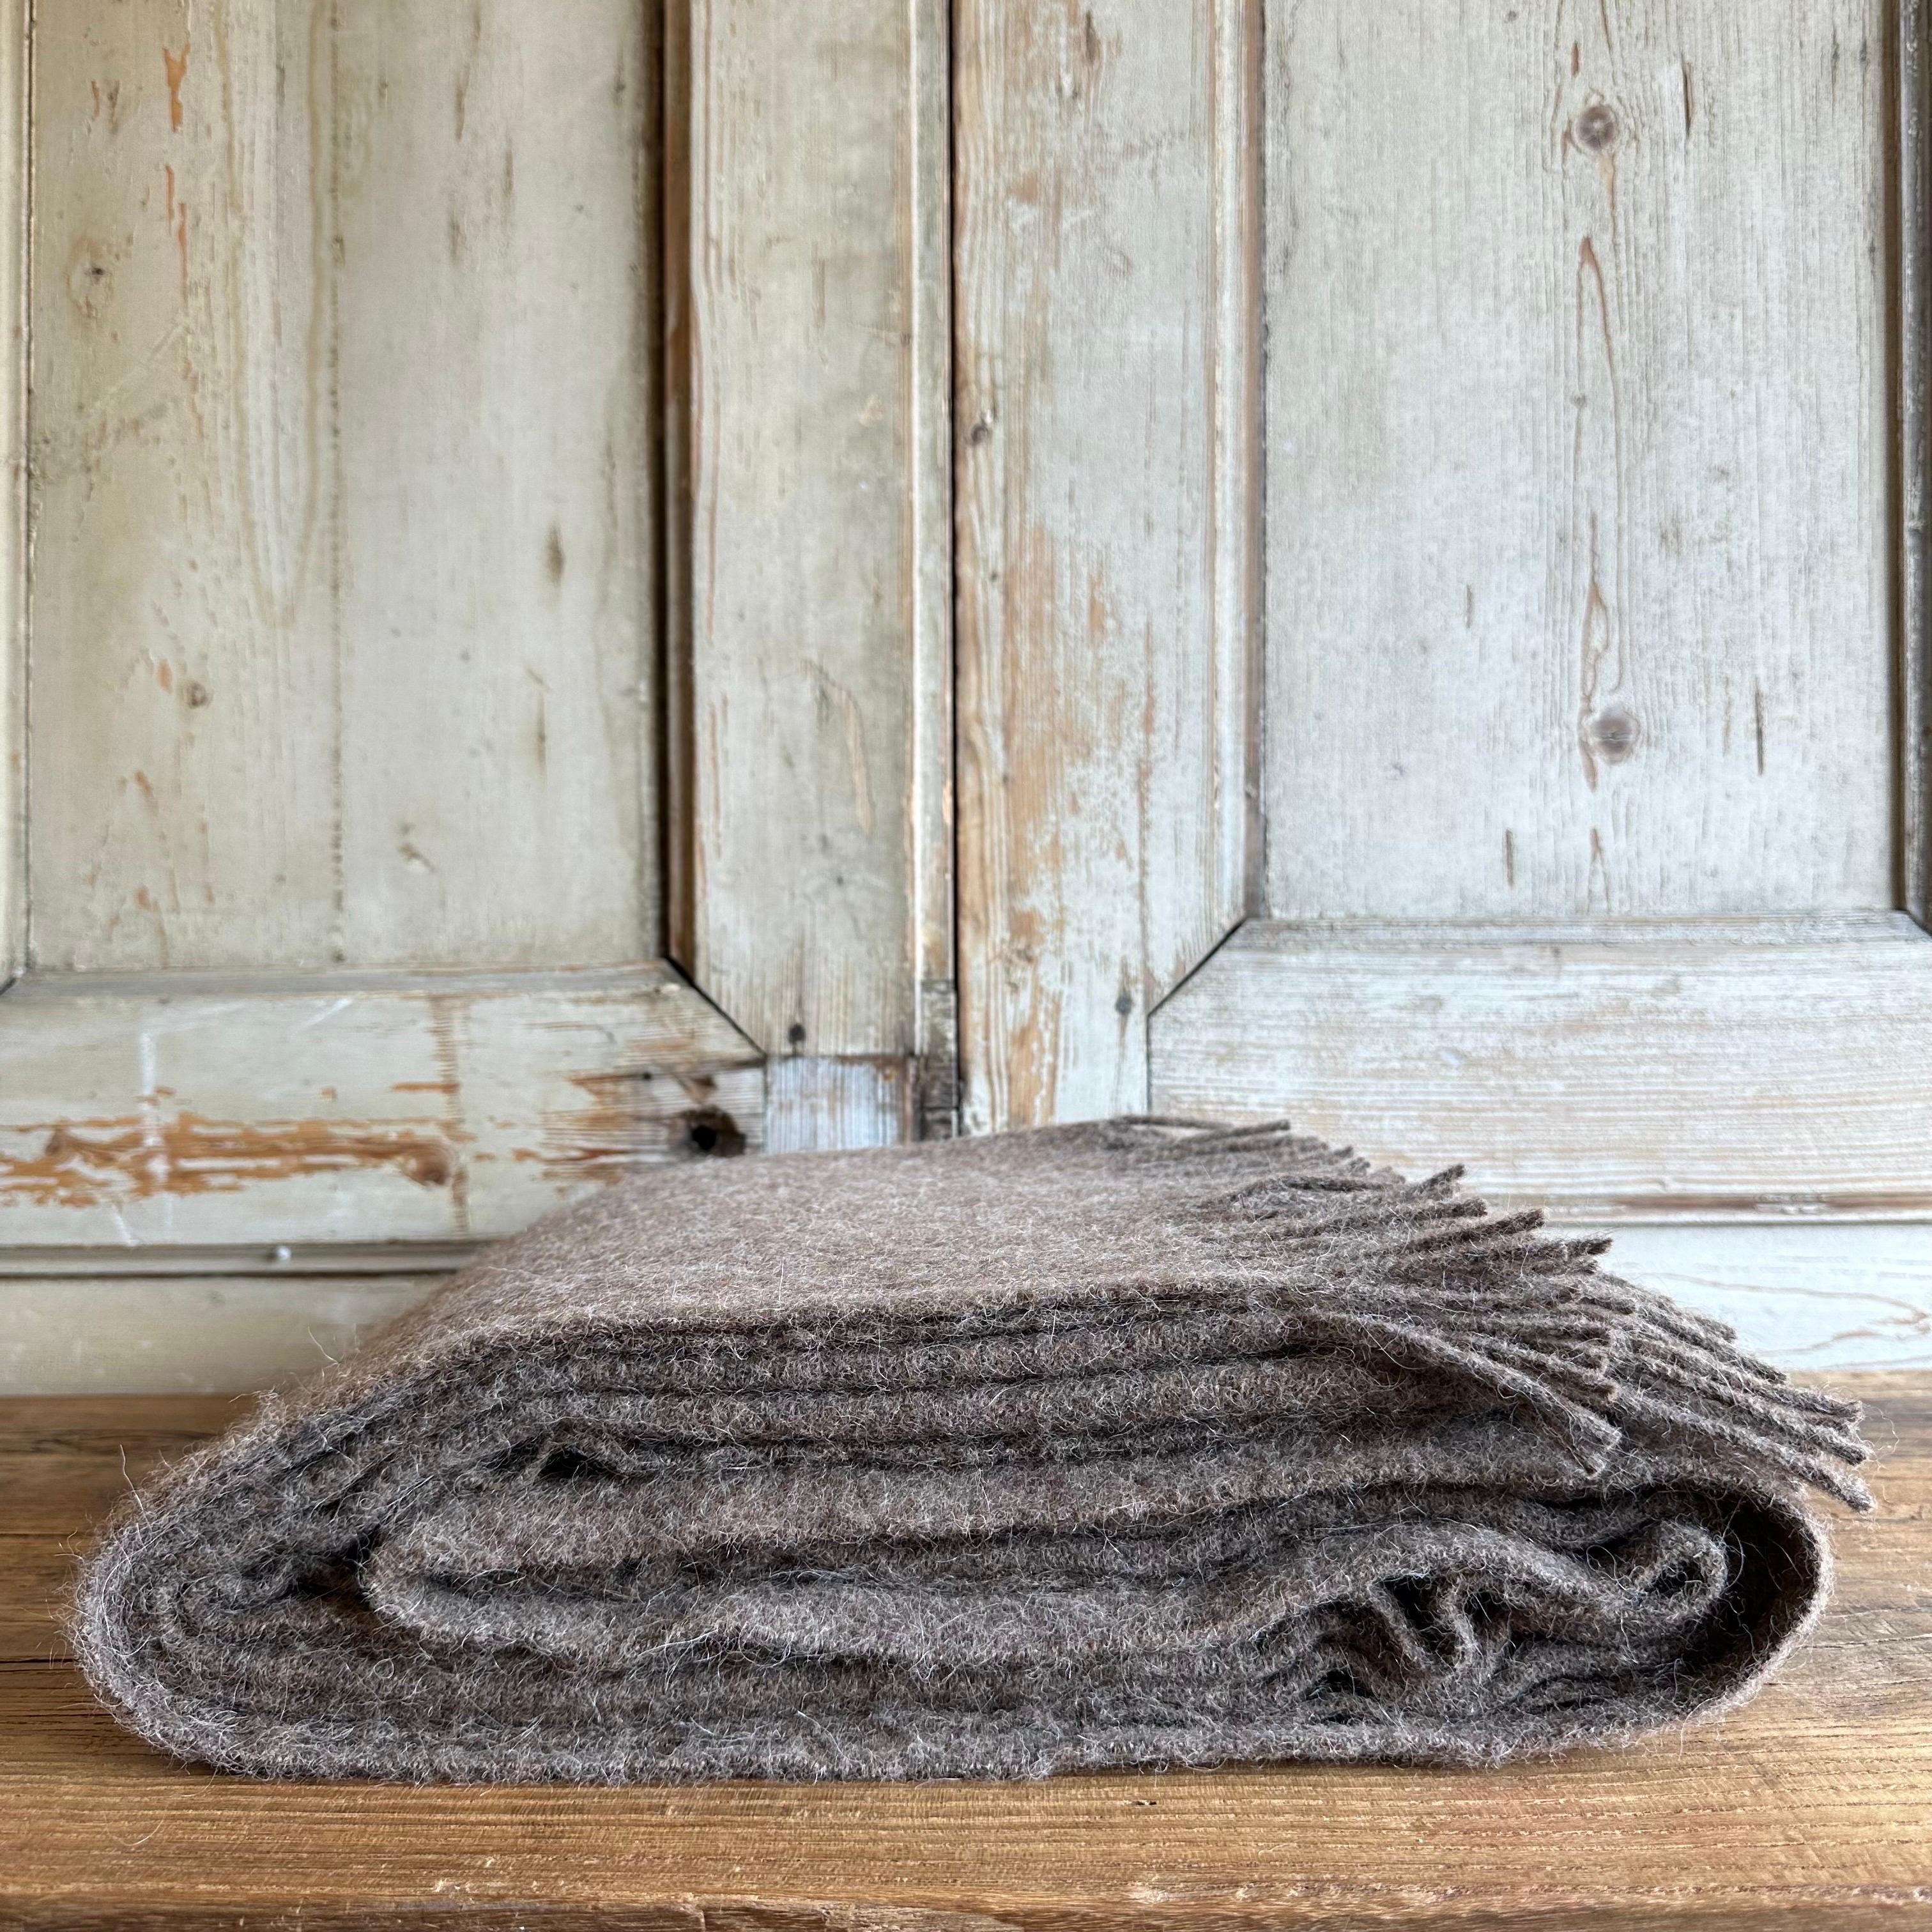 Fall in love with our enchanting Mason throw made of alpaca wool and genuine sheepskin wool. The quality is 100% natural, which is why you will experience an extreme softness both in its looks and when you feel the beautiful throw. An exclusive